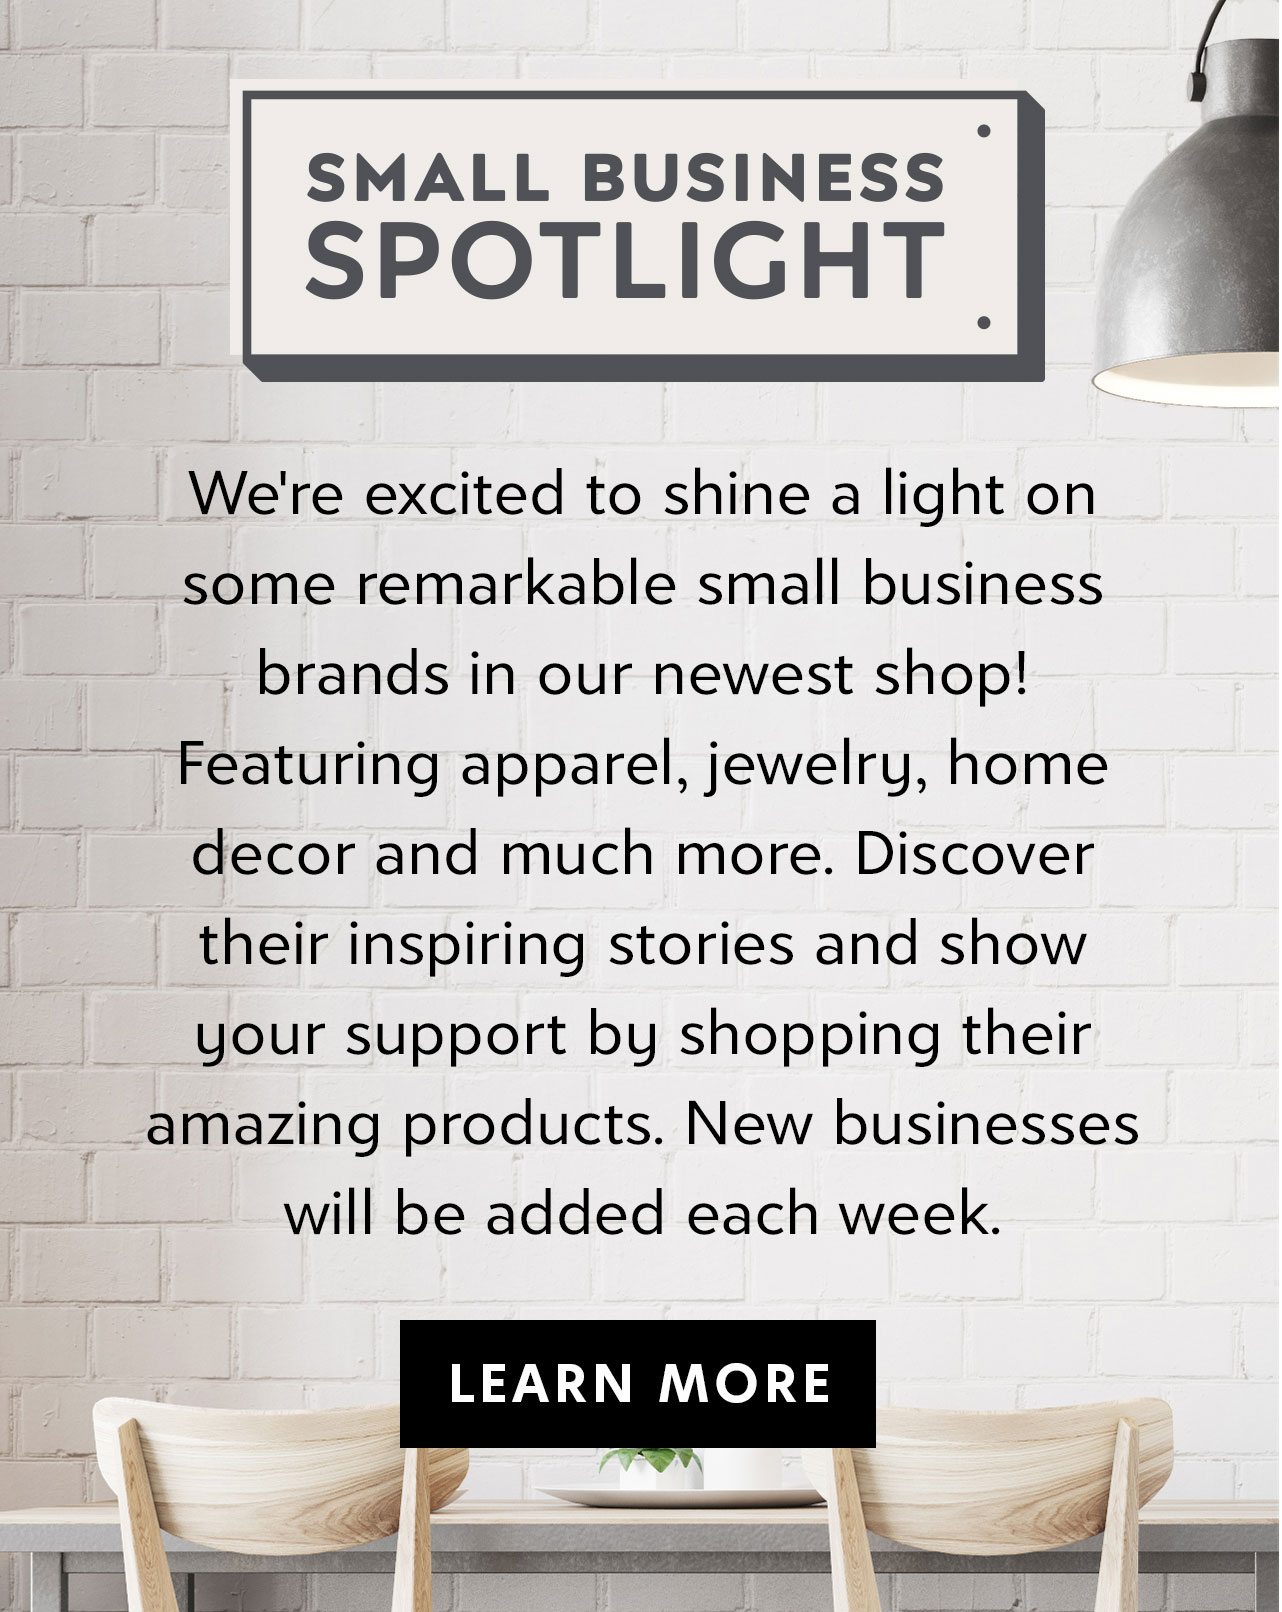 SMALL BUSINESS SPOTLIGHT – We’re excited to shine a light on some remarkable small business brands in our newest shop! Featuring apparel, jewelry, home decor and much more. Discover their inspiring stories and show your support by shopping their amazing products. Check back for new brands. – LEARN MORE